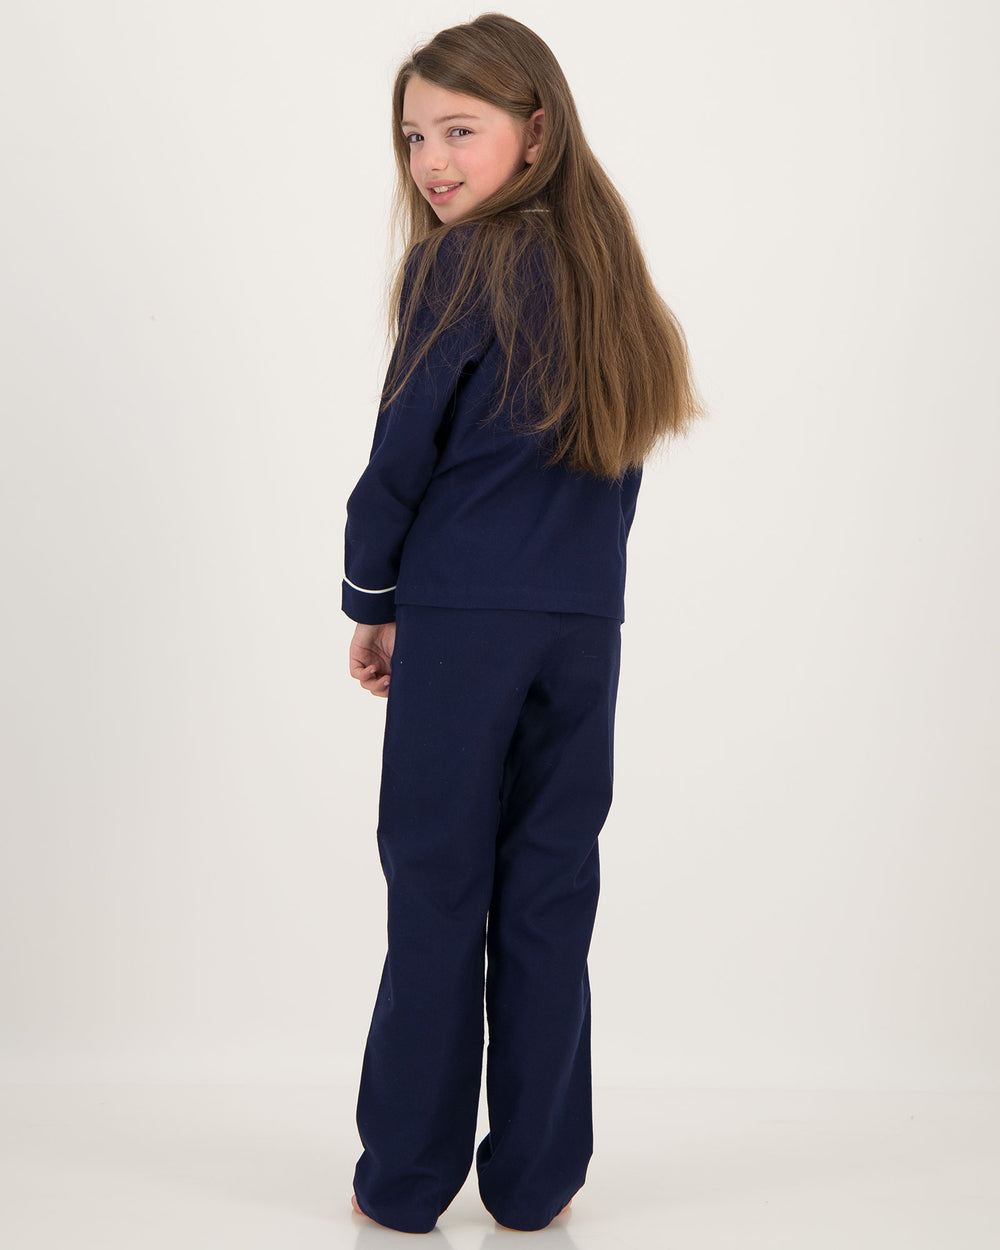 Girls Long Flannel Pyjamas Navy with White Piping Back - Woodstock Laundry